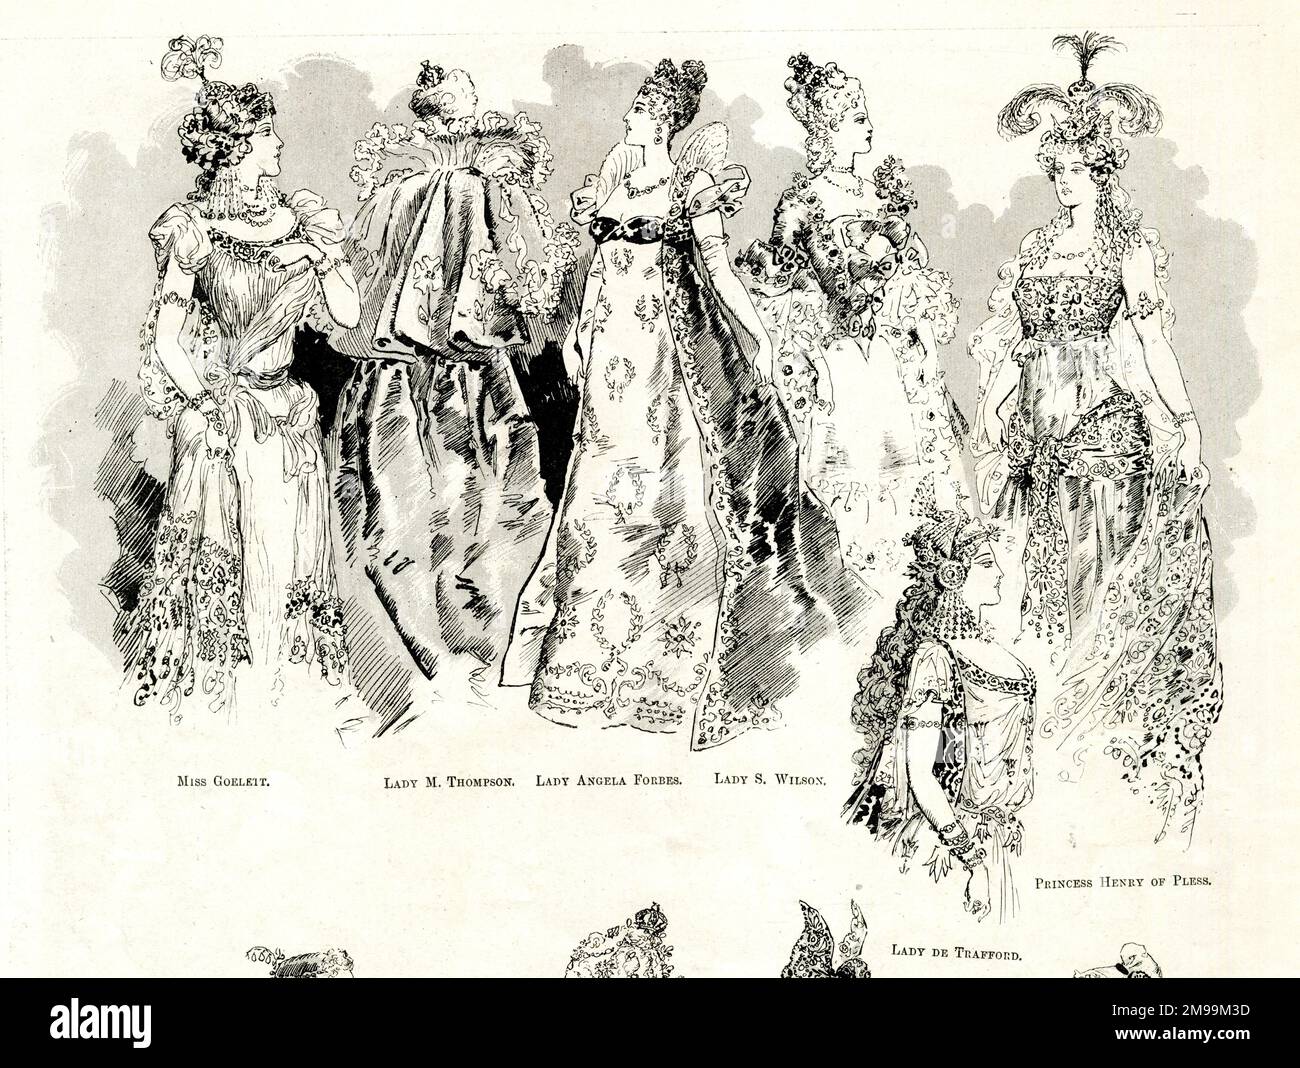 Historic Fancy Dress Ball at Devonshire House, London - Miss Goelett, Lady M Thompson, Lady Angela Forbes, Lady S Wilson, Lady de Trafford and Princess Henry of Pless. Stock Photo